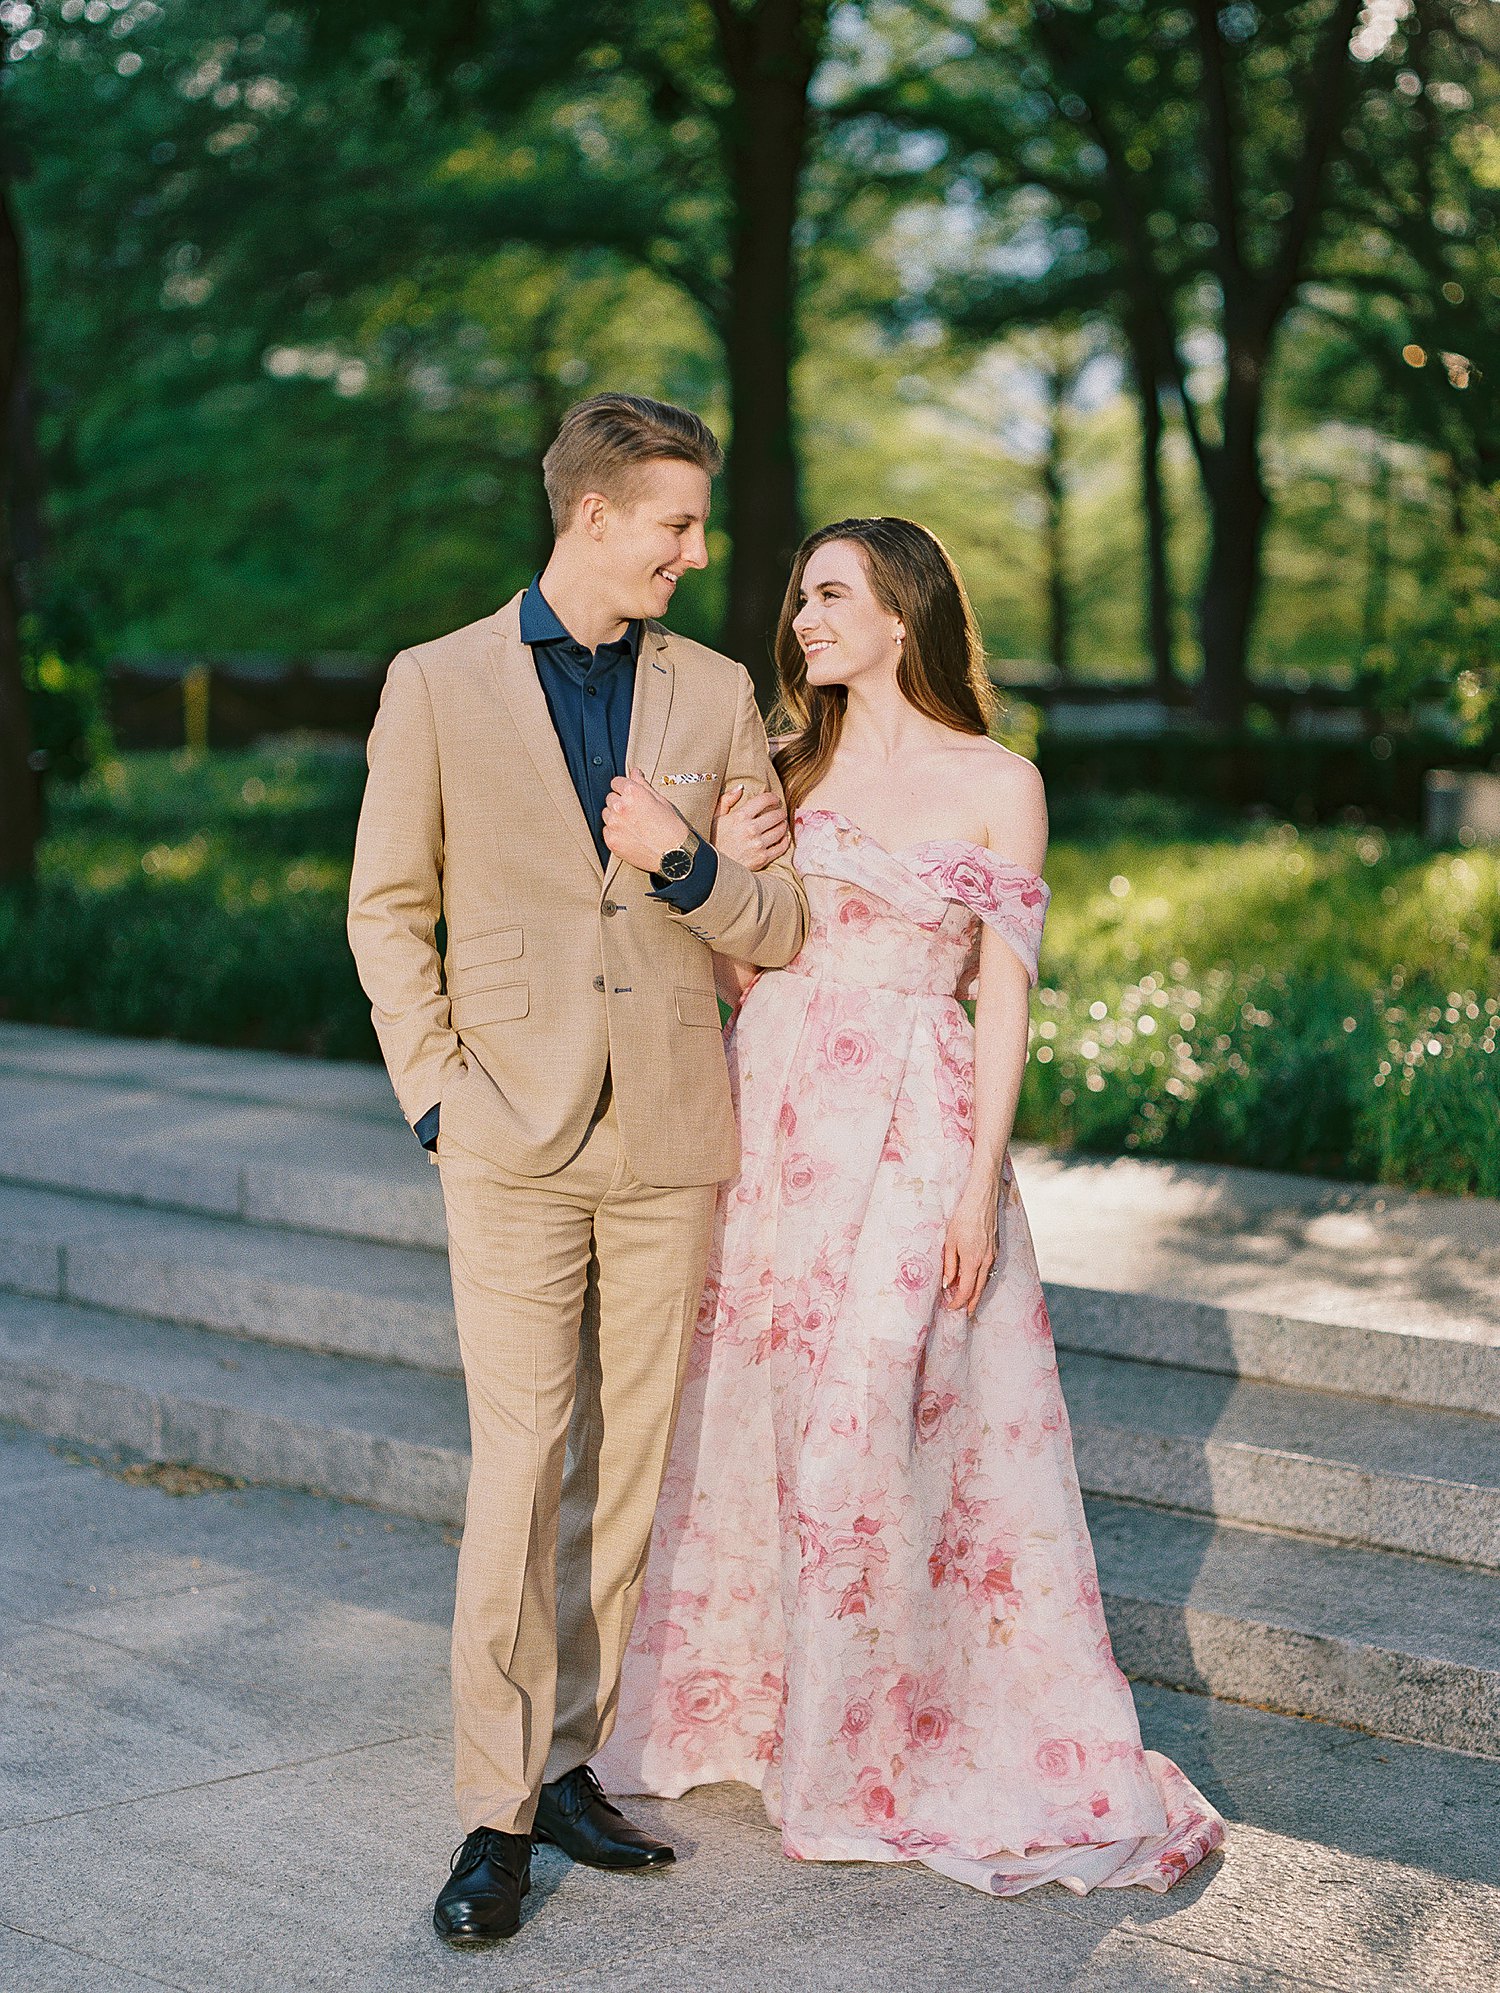 smiling woman in Pink floral gown standing with man in tan suite and blue shirt dallas garden engagement